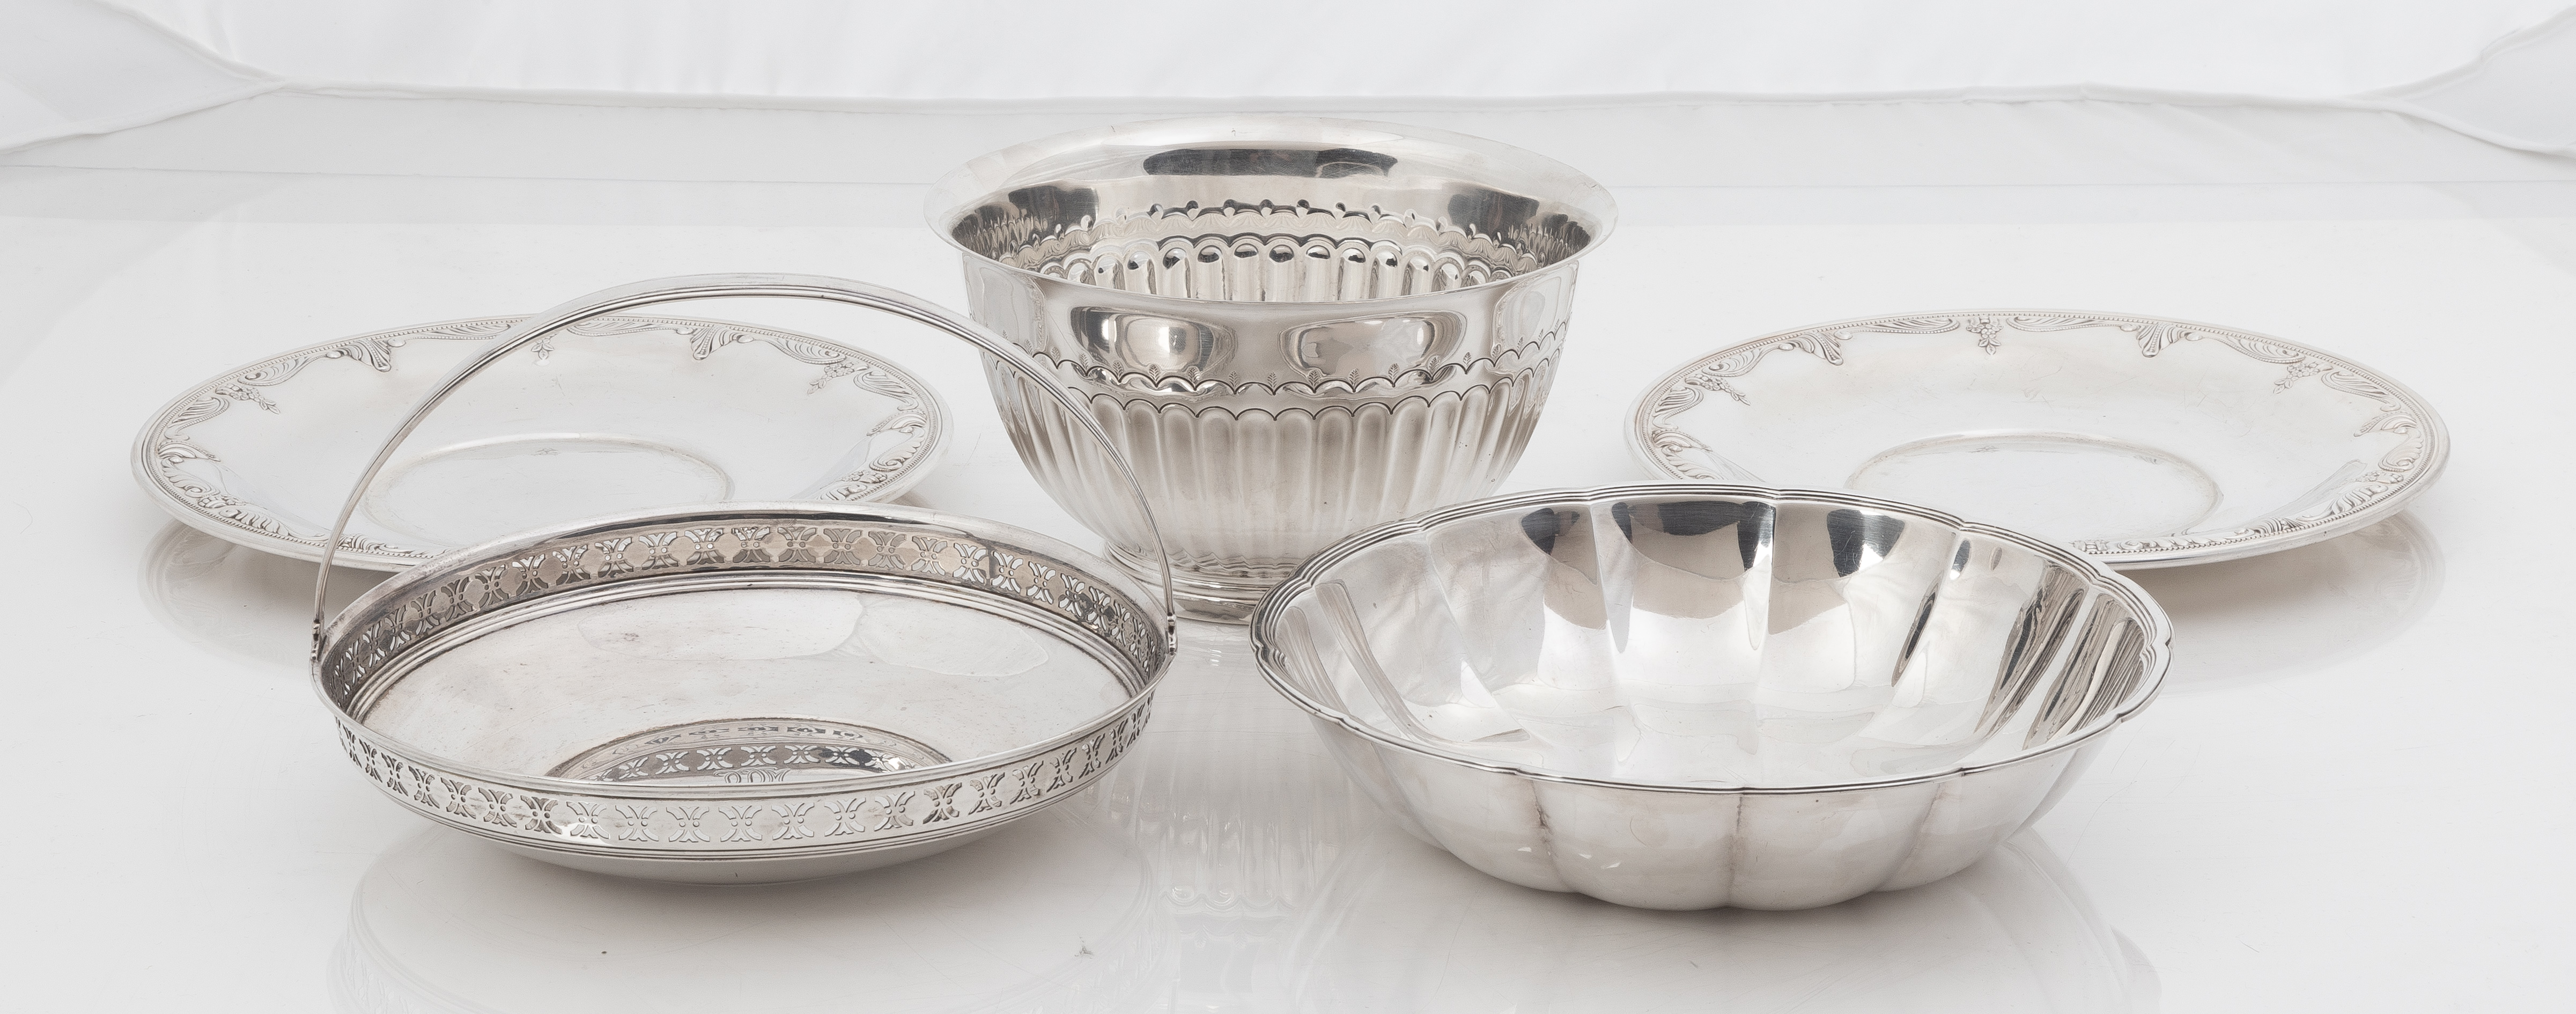 GROUP OF STERLING SILVER BOWLS